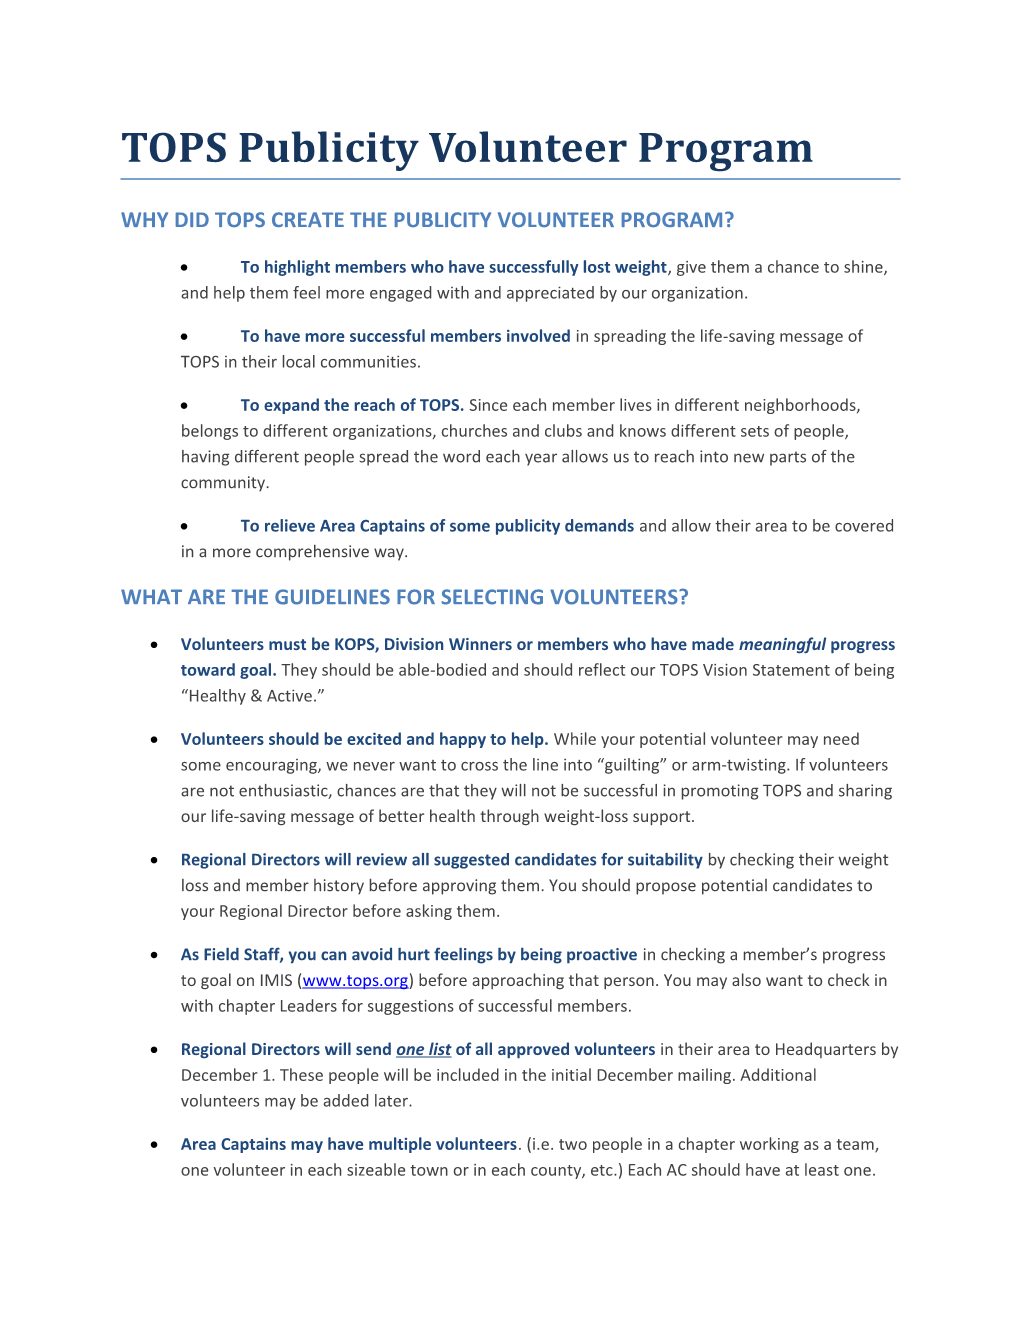 Why Did Tops Create the Publicity Volunteer Program?